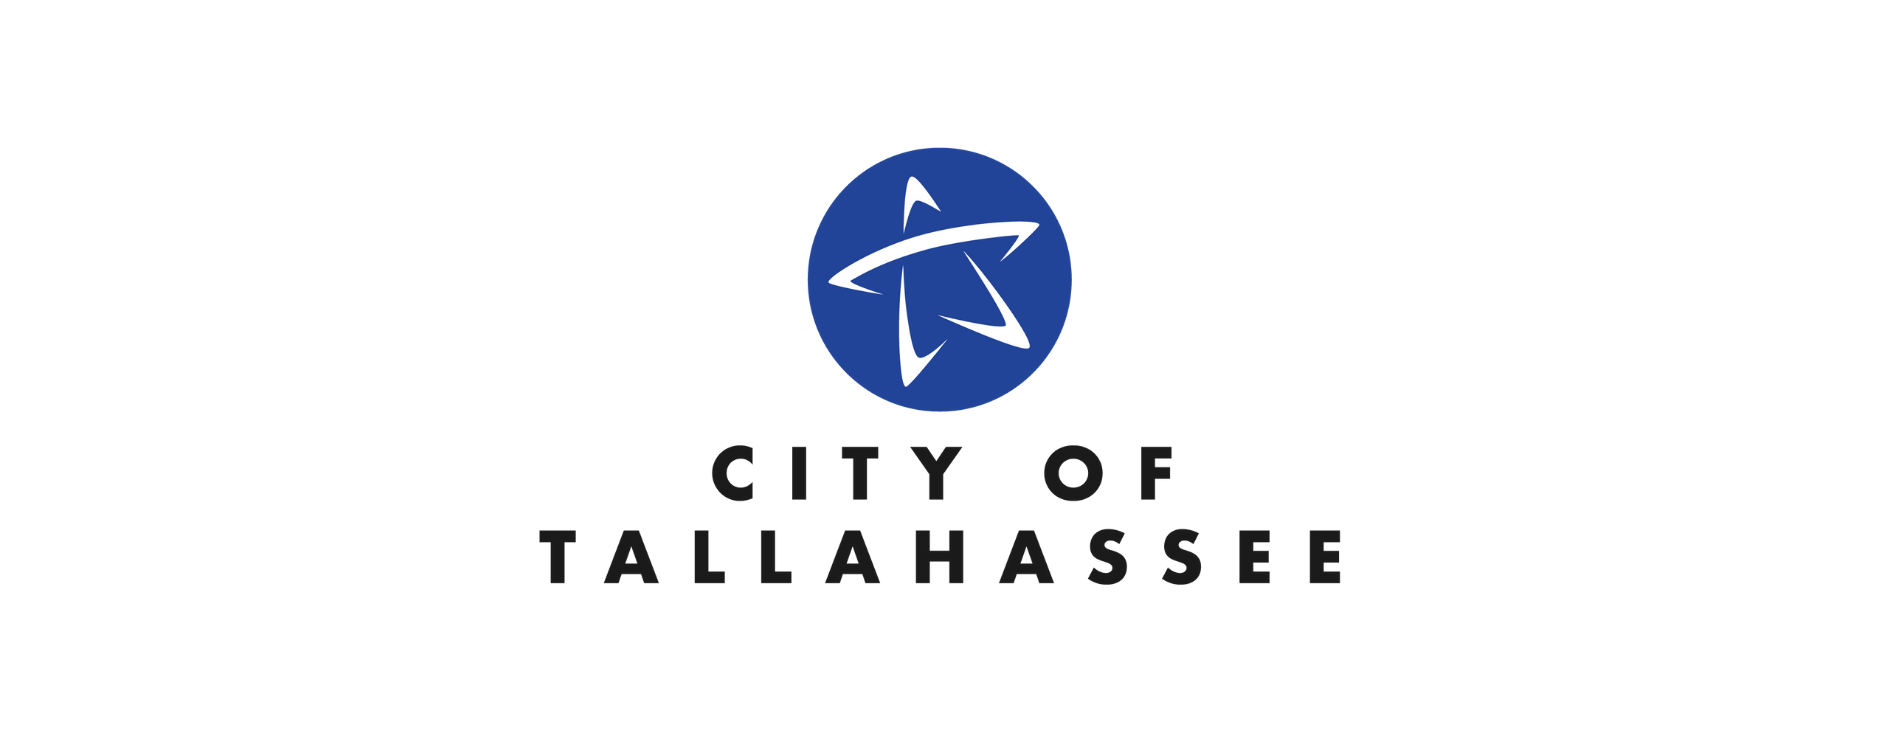 the City of Tallahassee